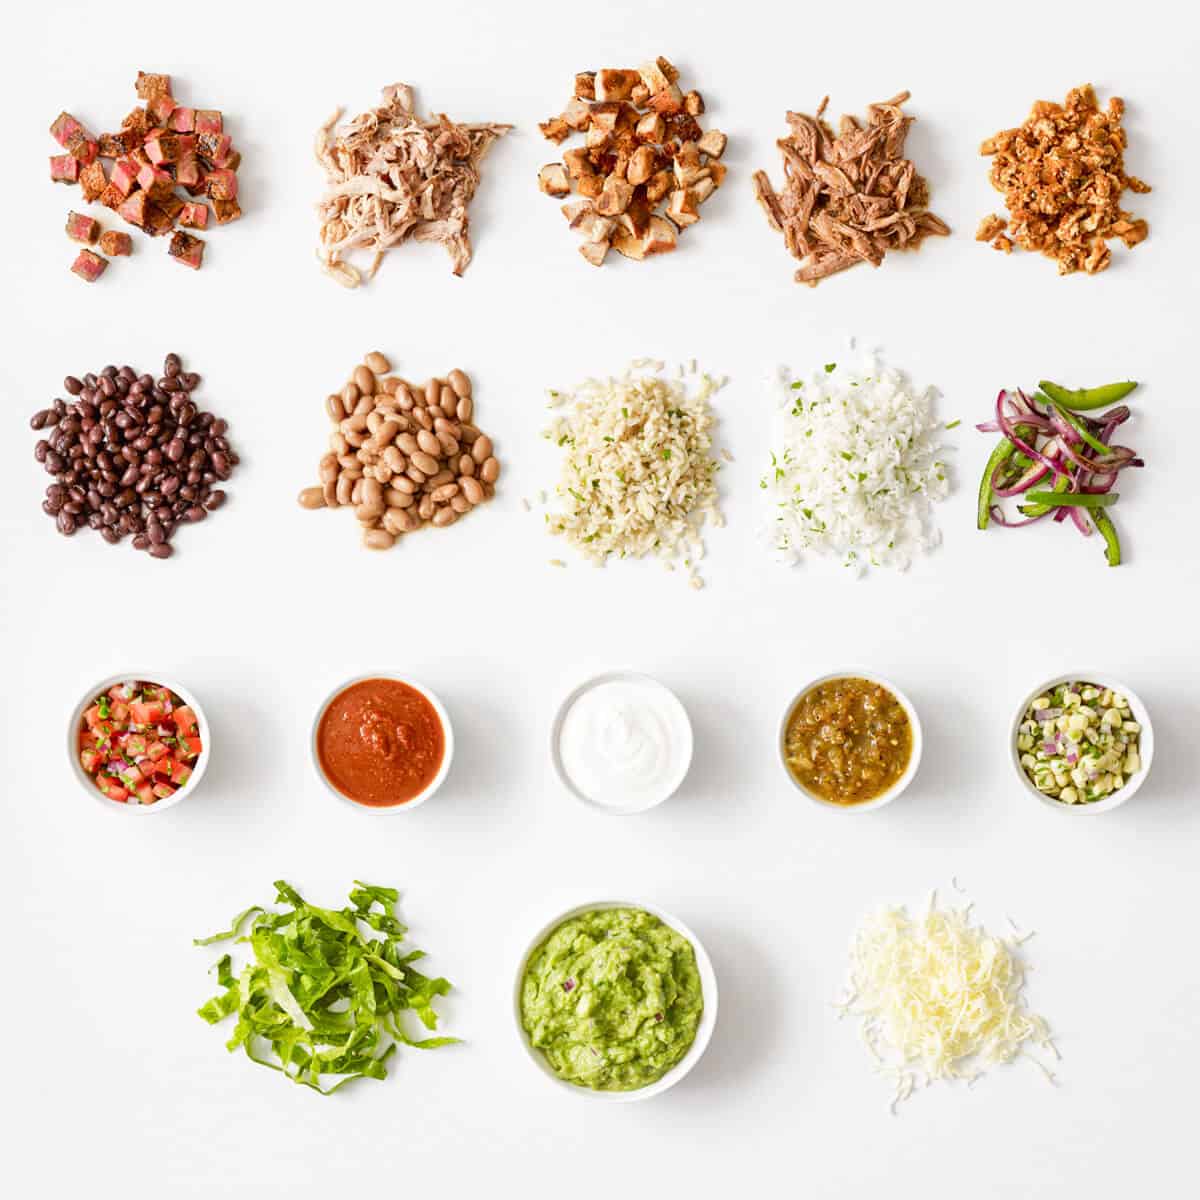 Chipotle Mexican grill ingredients